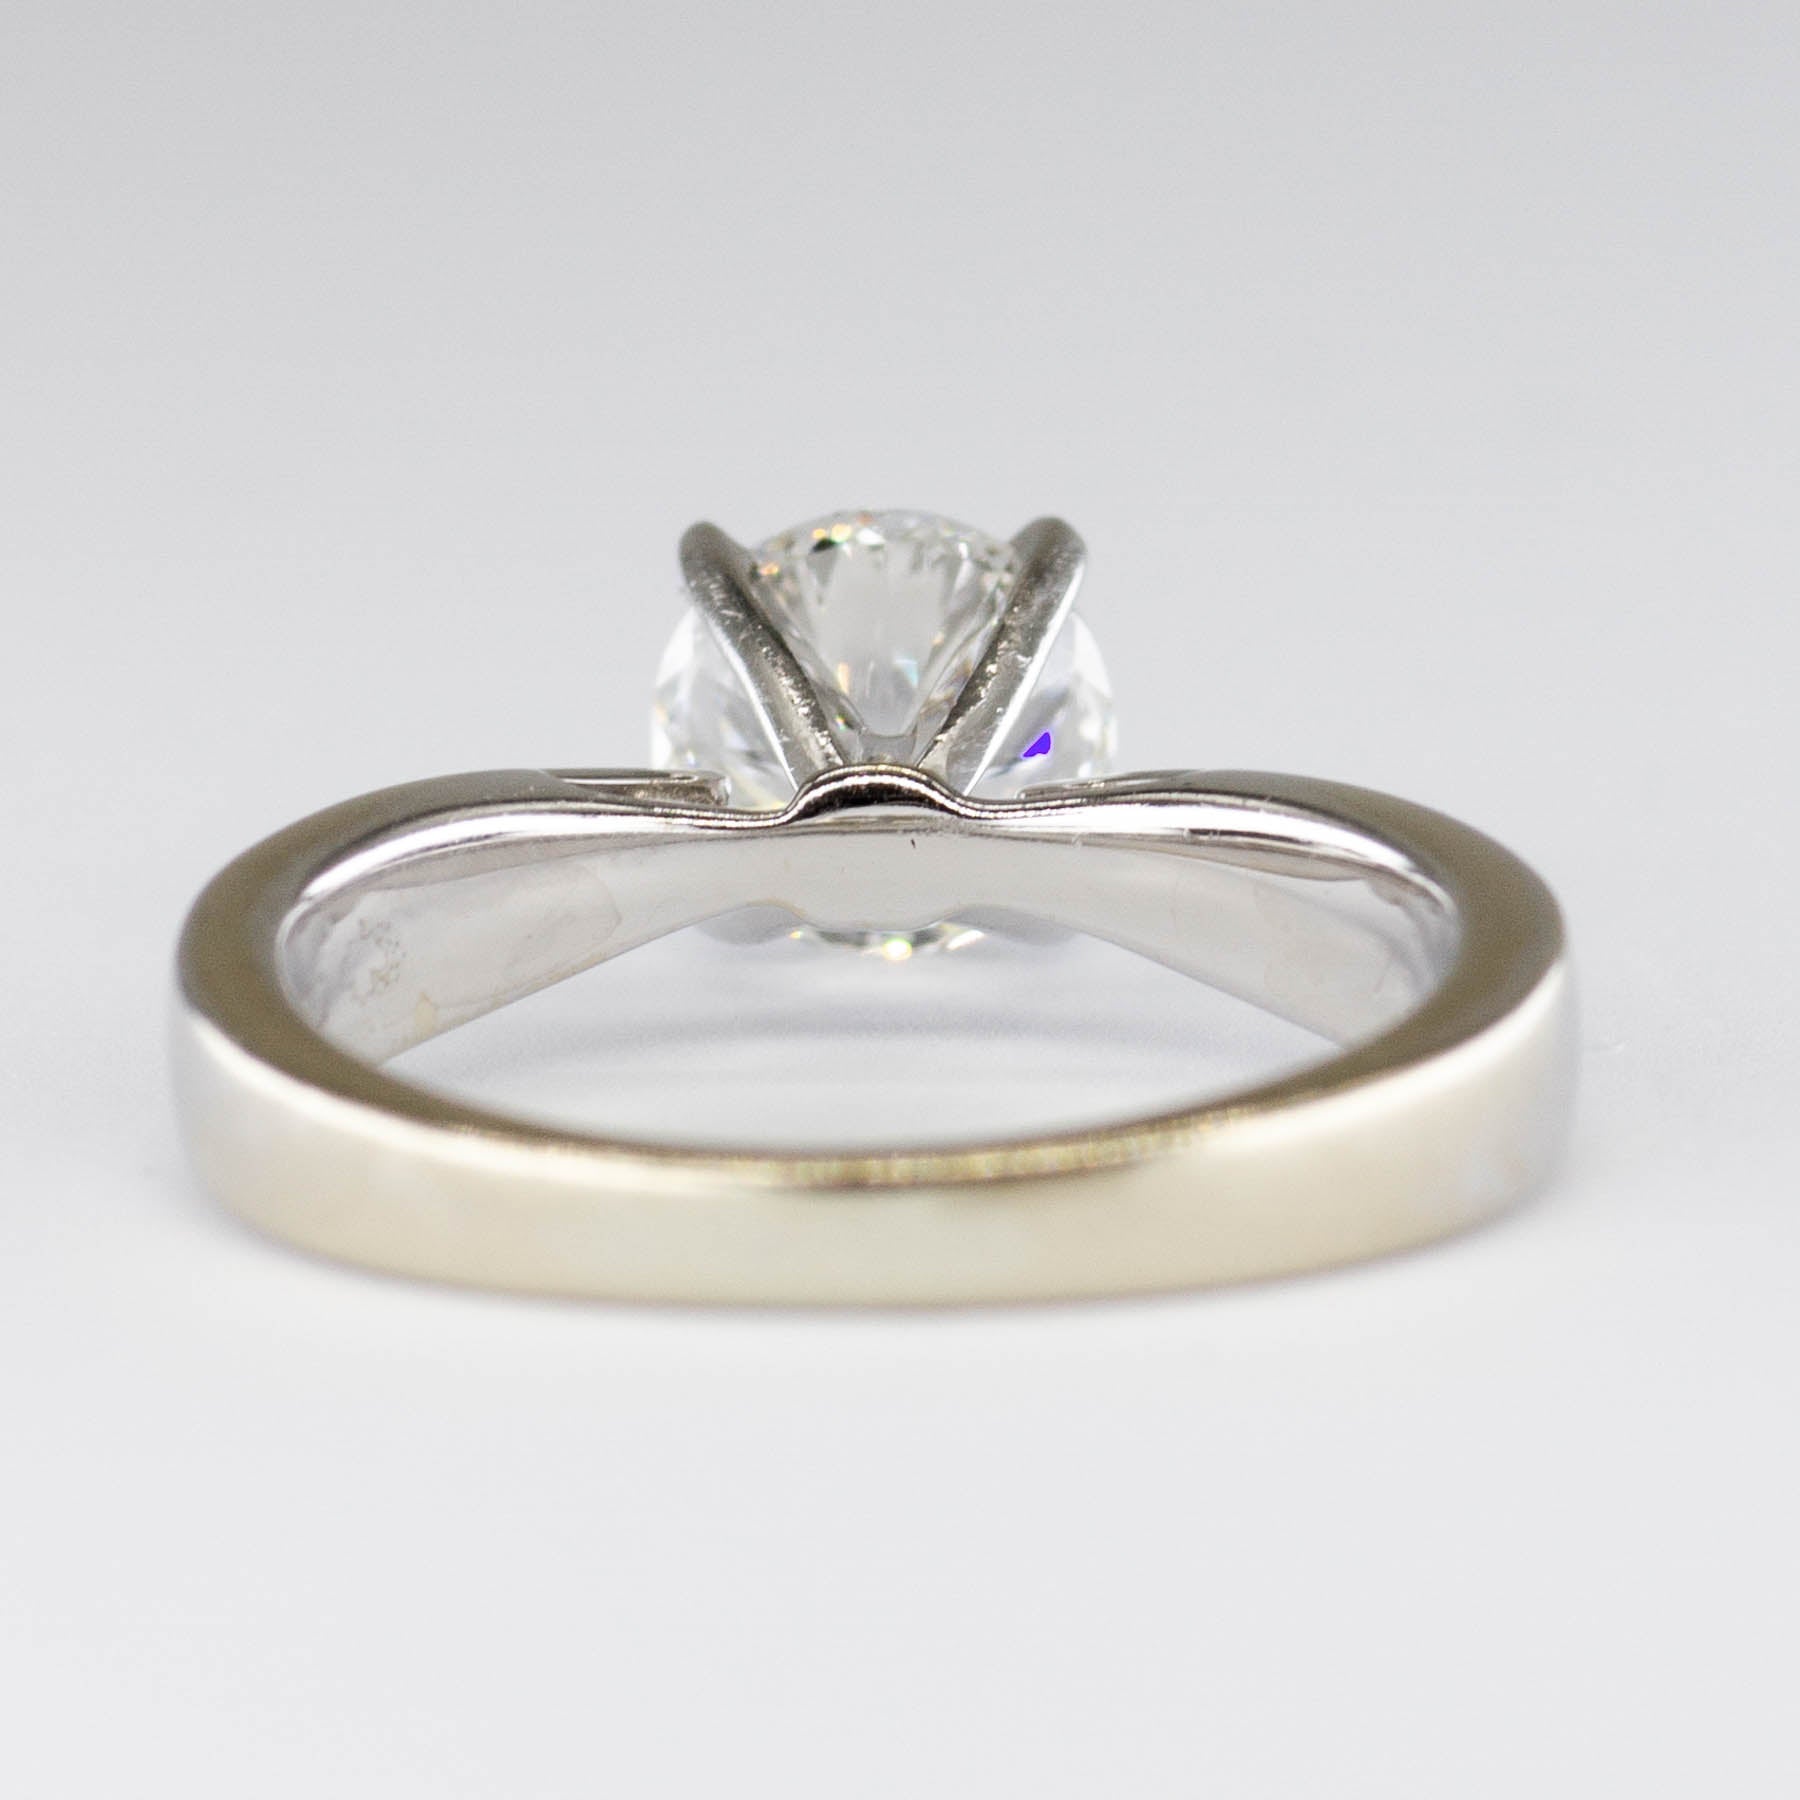 Canadian 100 Facet Diamond Solitaire Engagement Ring  | 1.07ct SI2 H VG | SZ 4.5 |